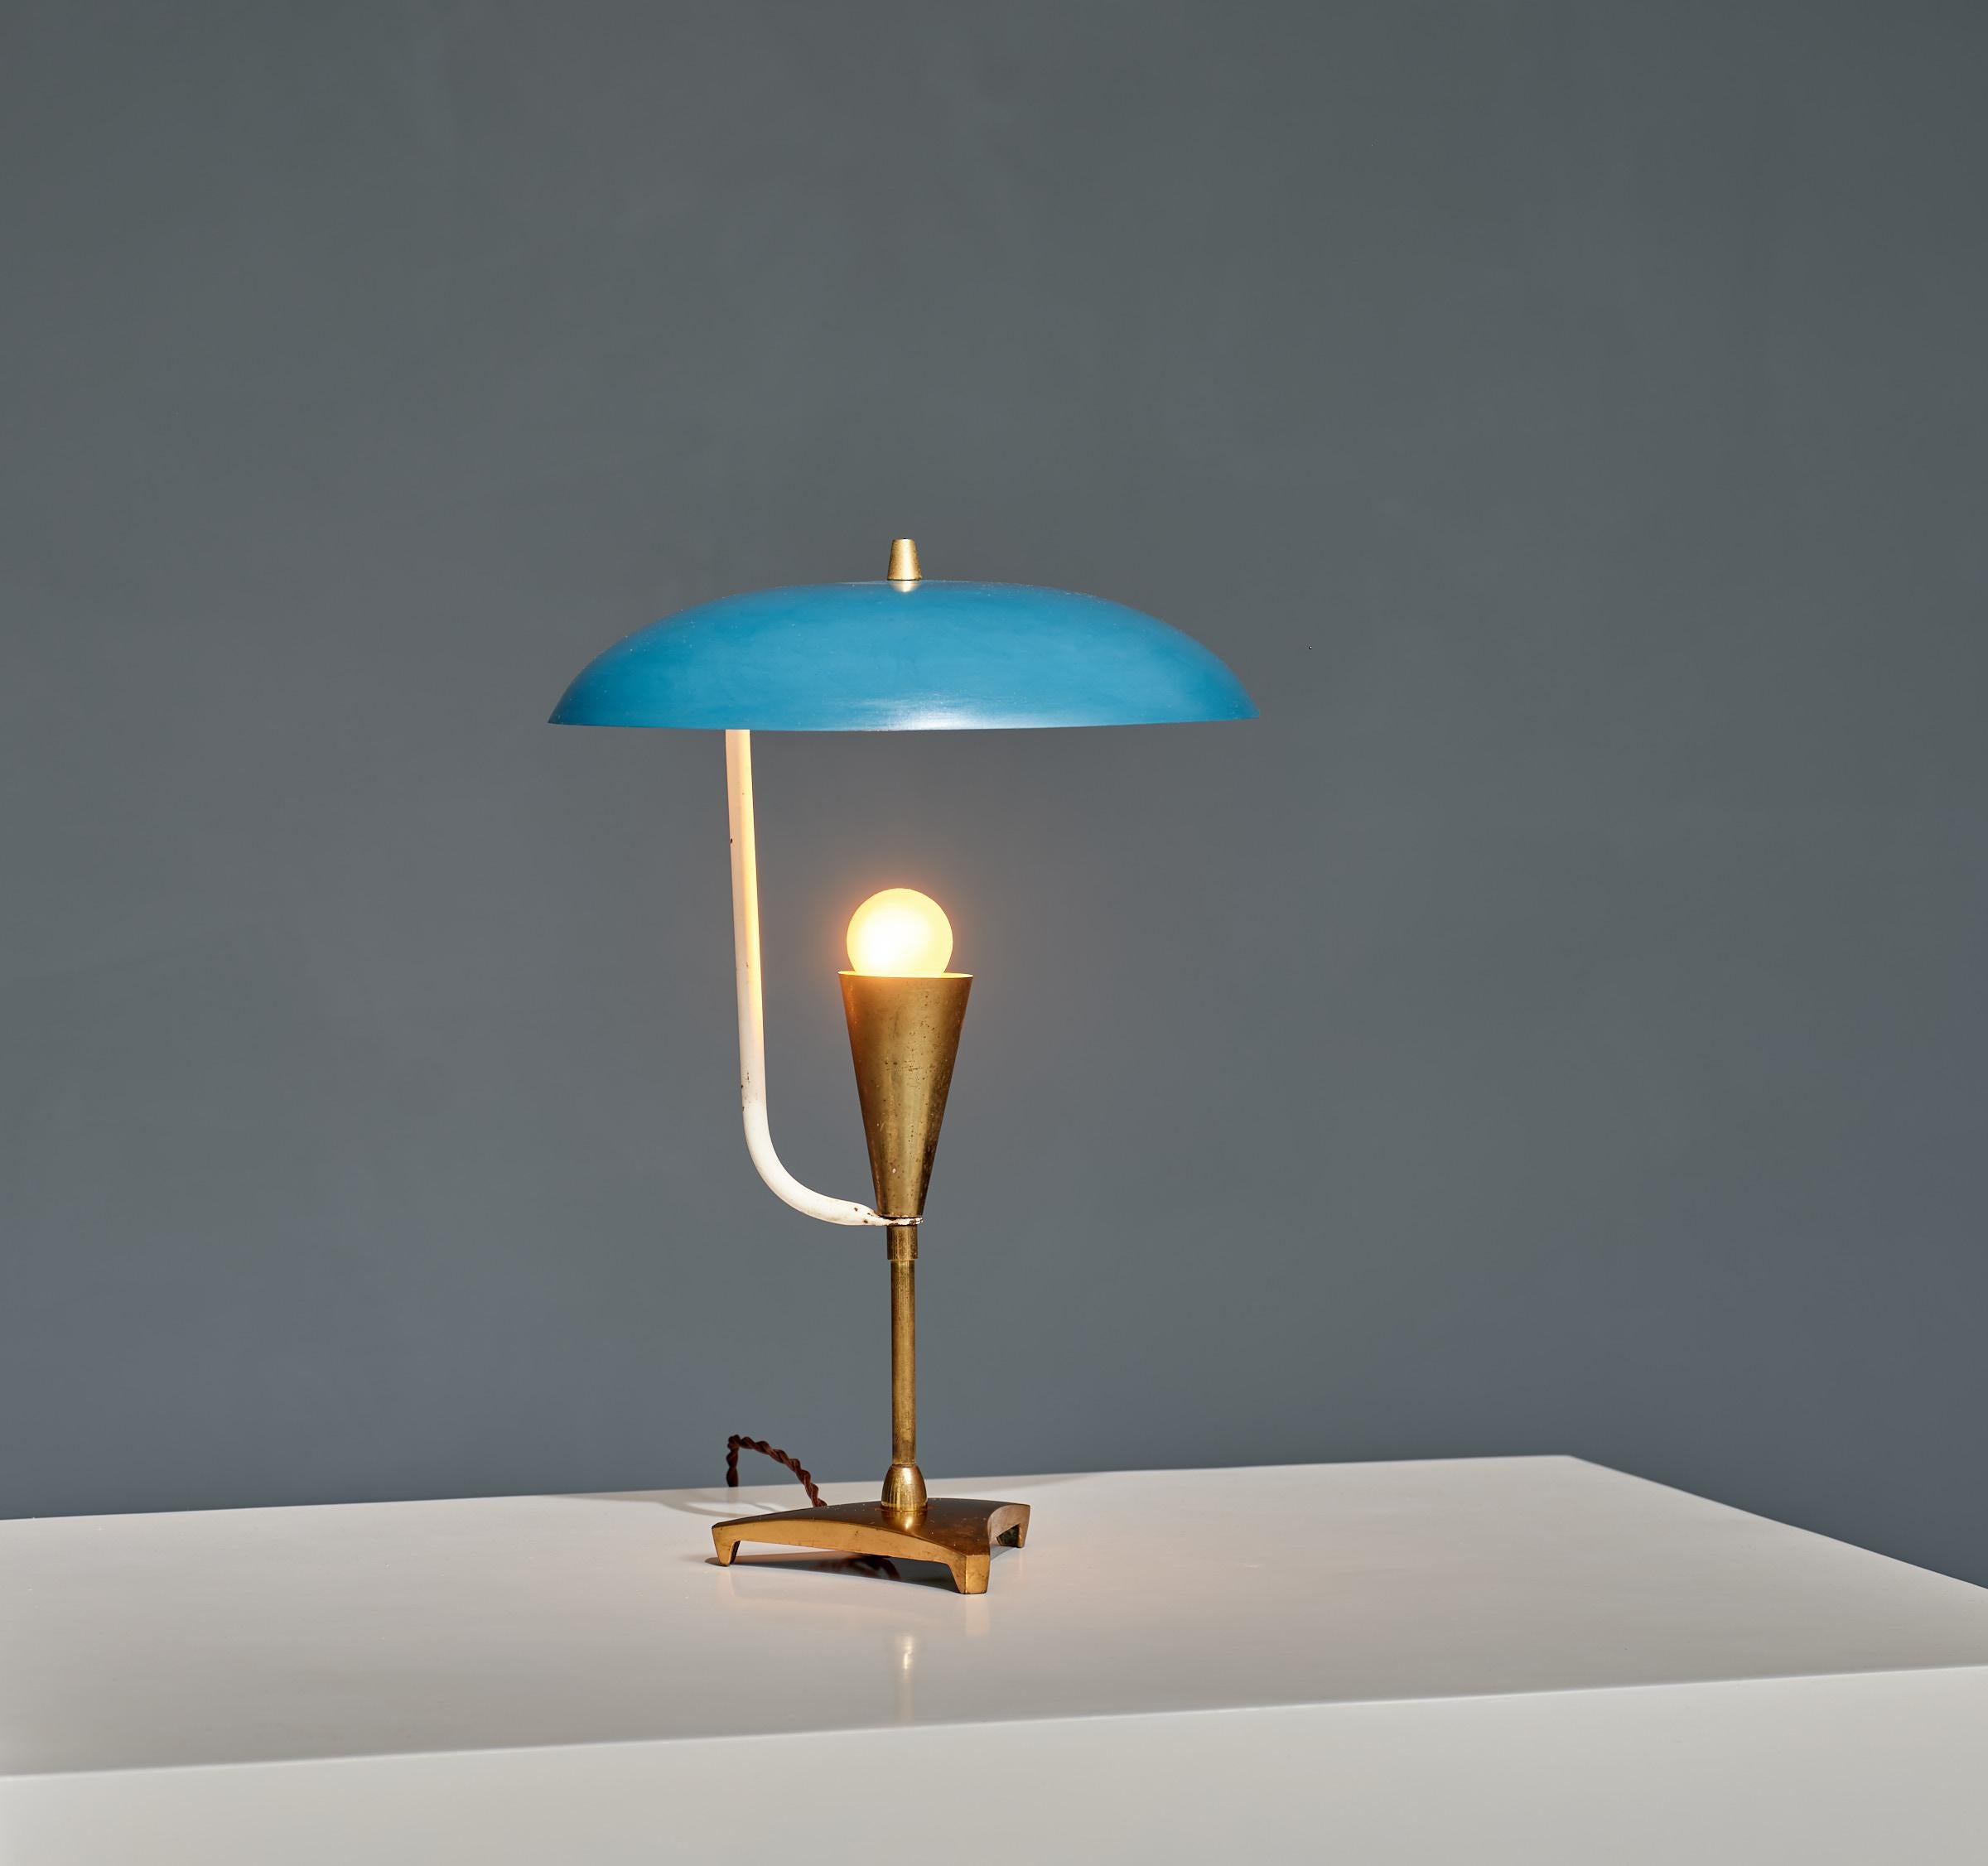 Illuminate your space with timeless elegance and a touch of Italian design from the 1950s. This exquisite table lamp features a precious brass structure with its original patina, giving it a unique and distinguished character. The lamp's airy